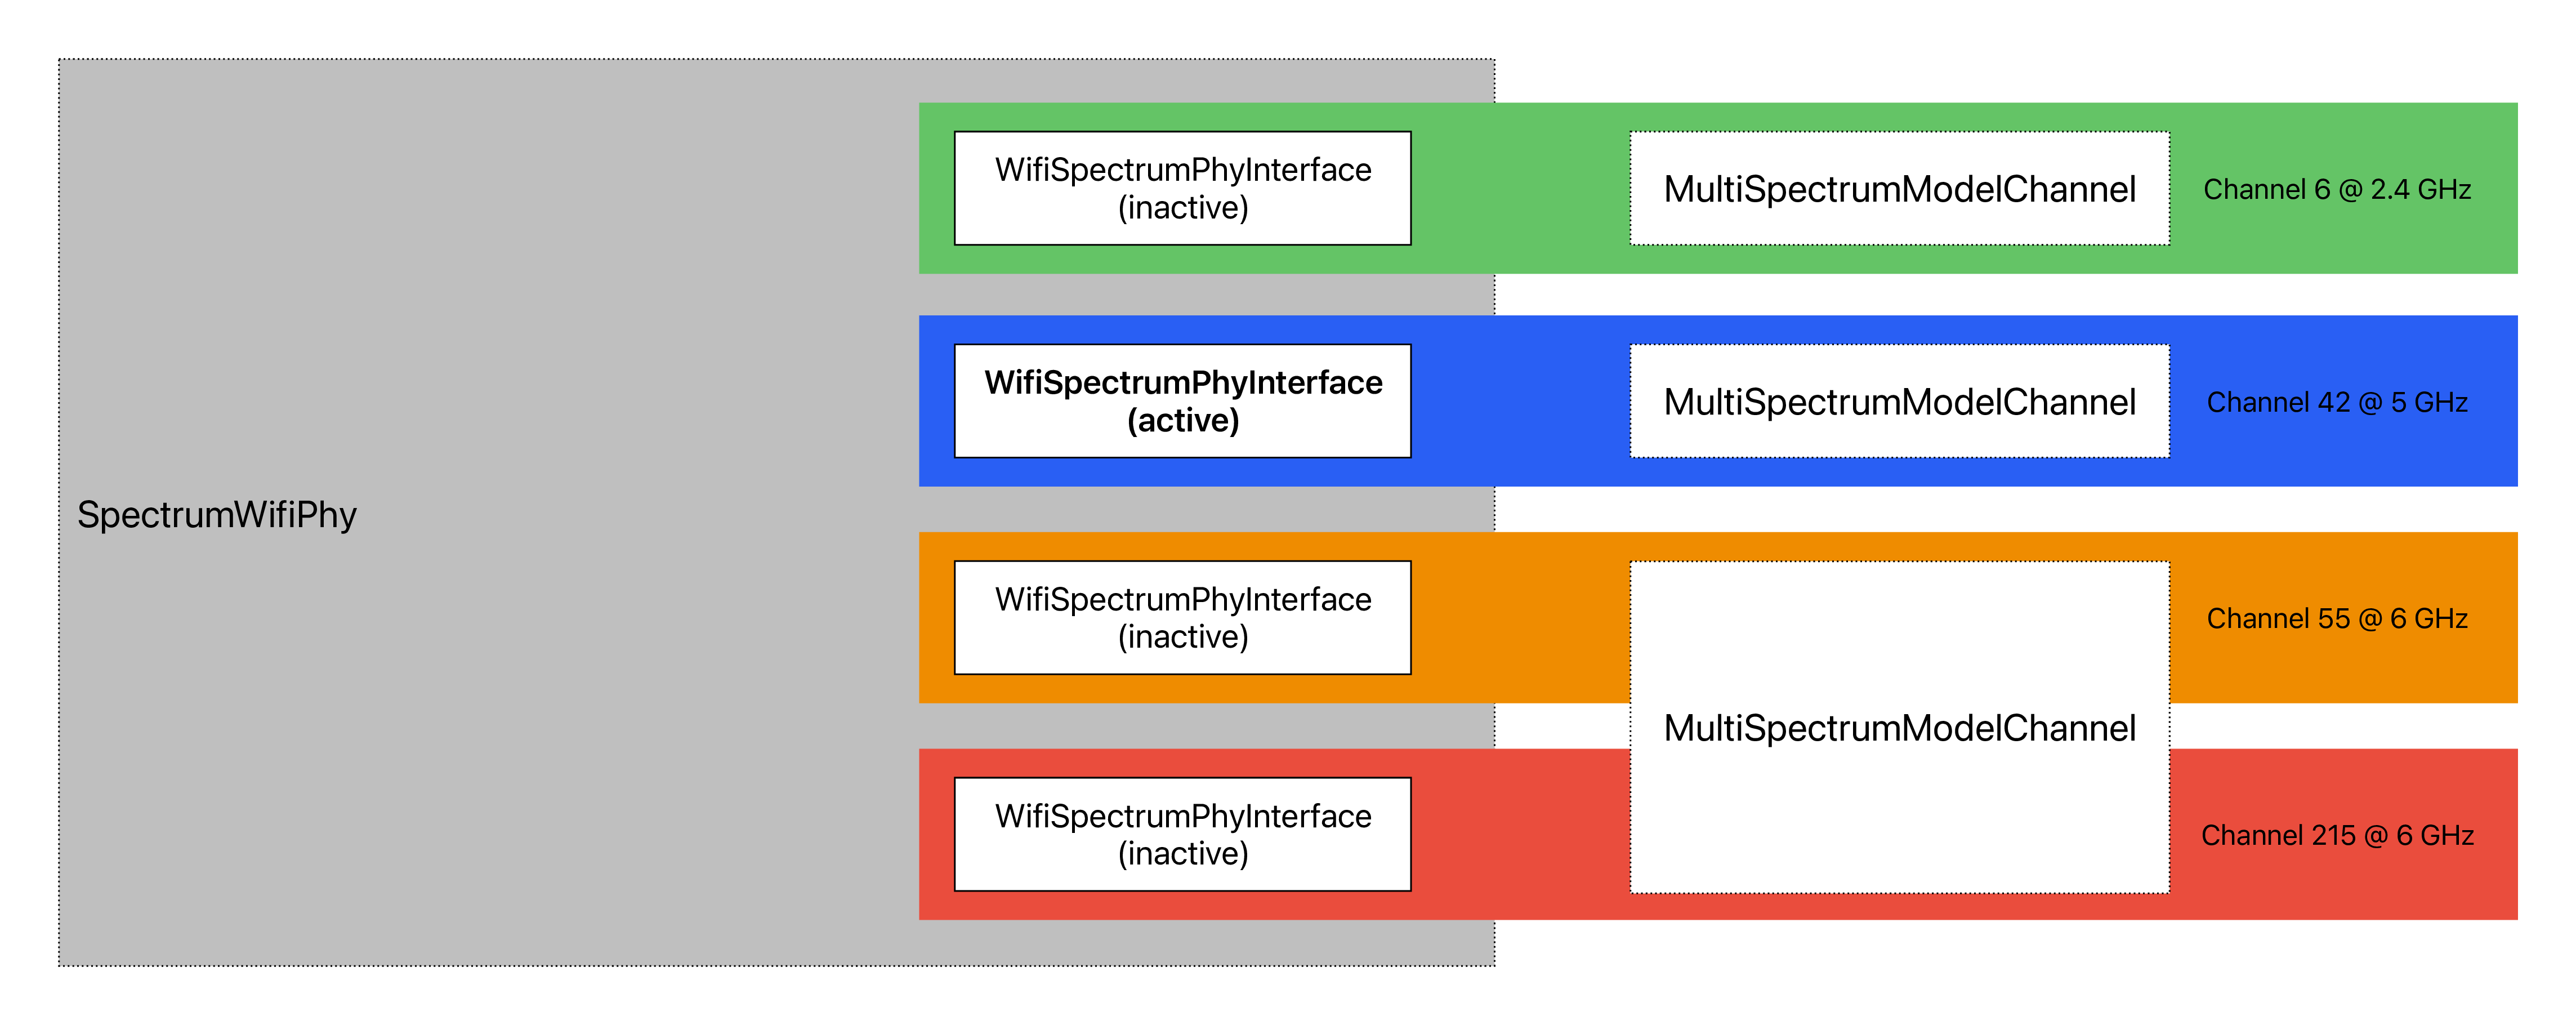 _images/spectrum-wifi-phy-multiple-interfaces.png